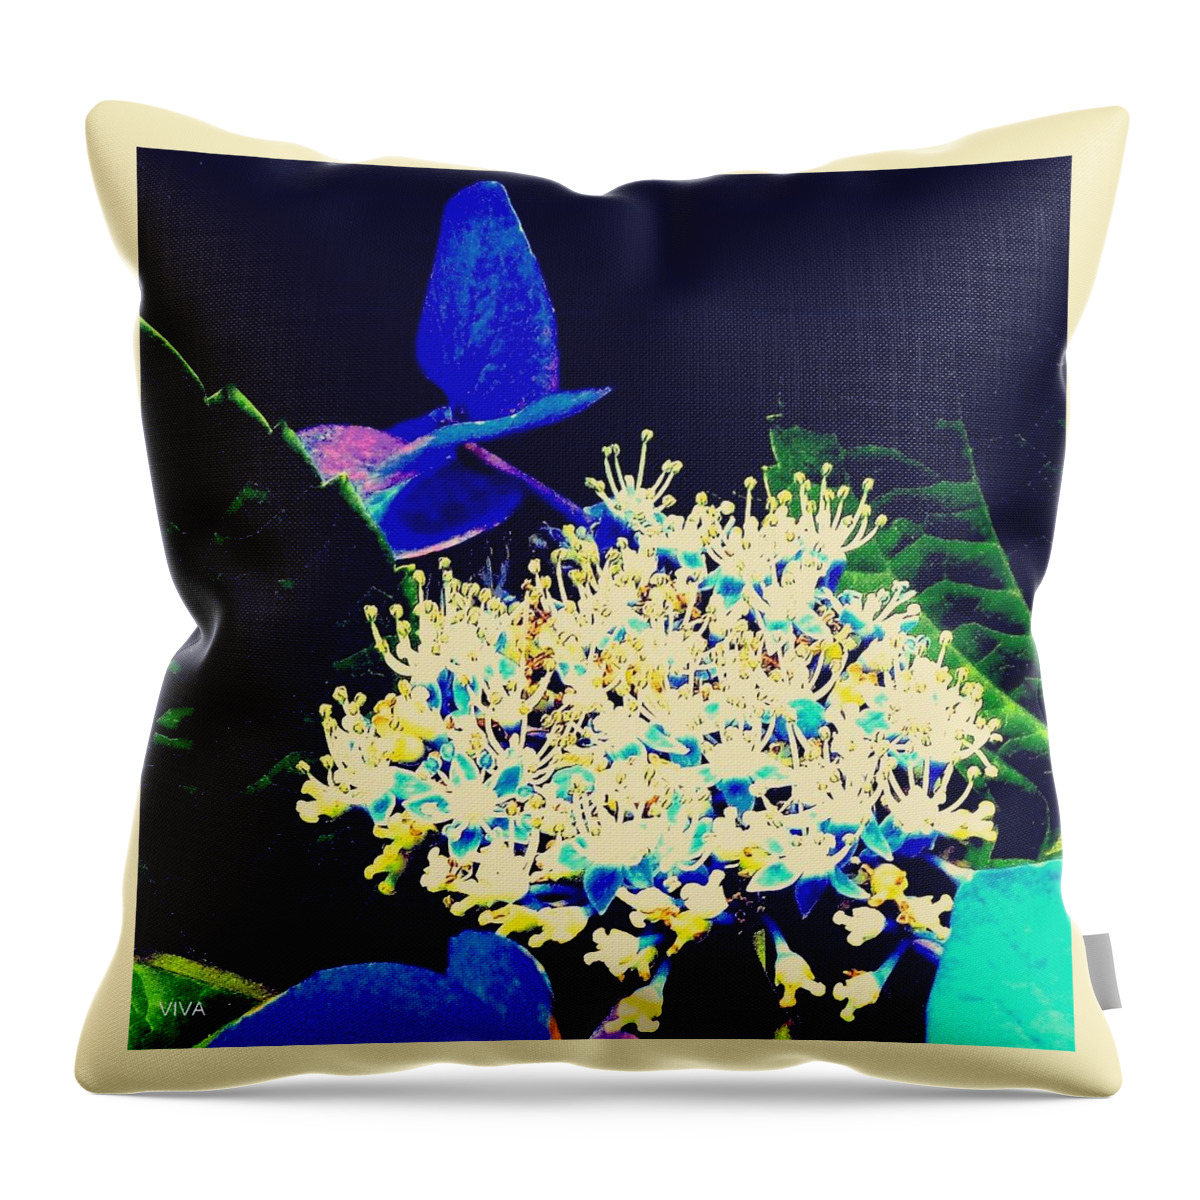 Hydrangea Throw Pillow featuring the photograph Hydrangea Dreaming - Abstract by VIVA Anderson